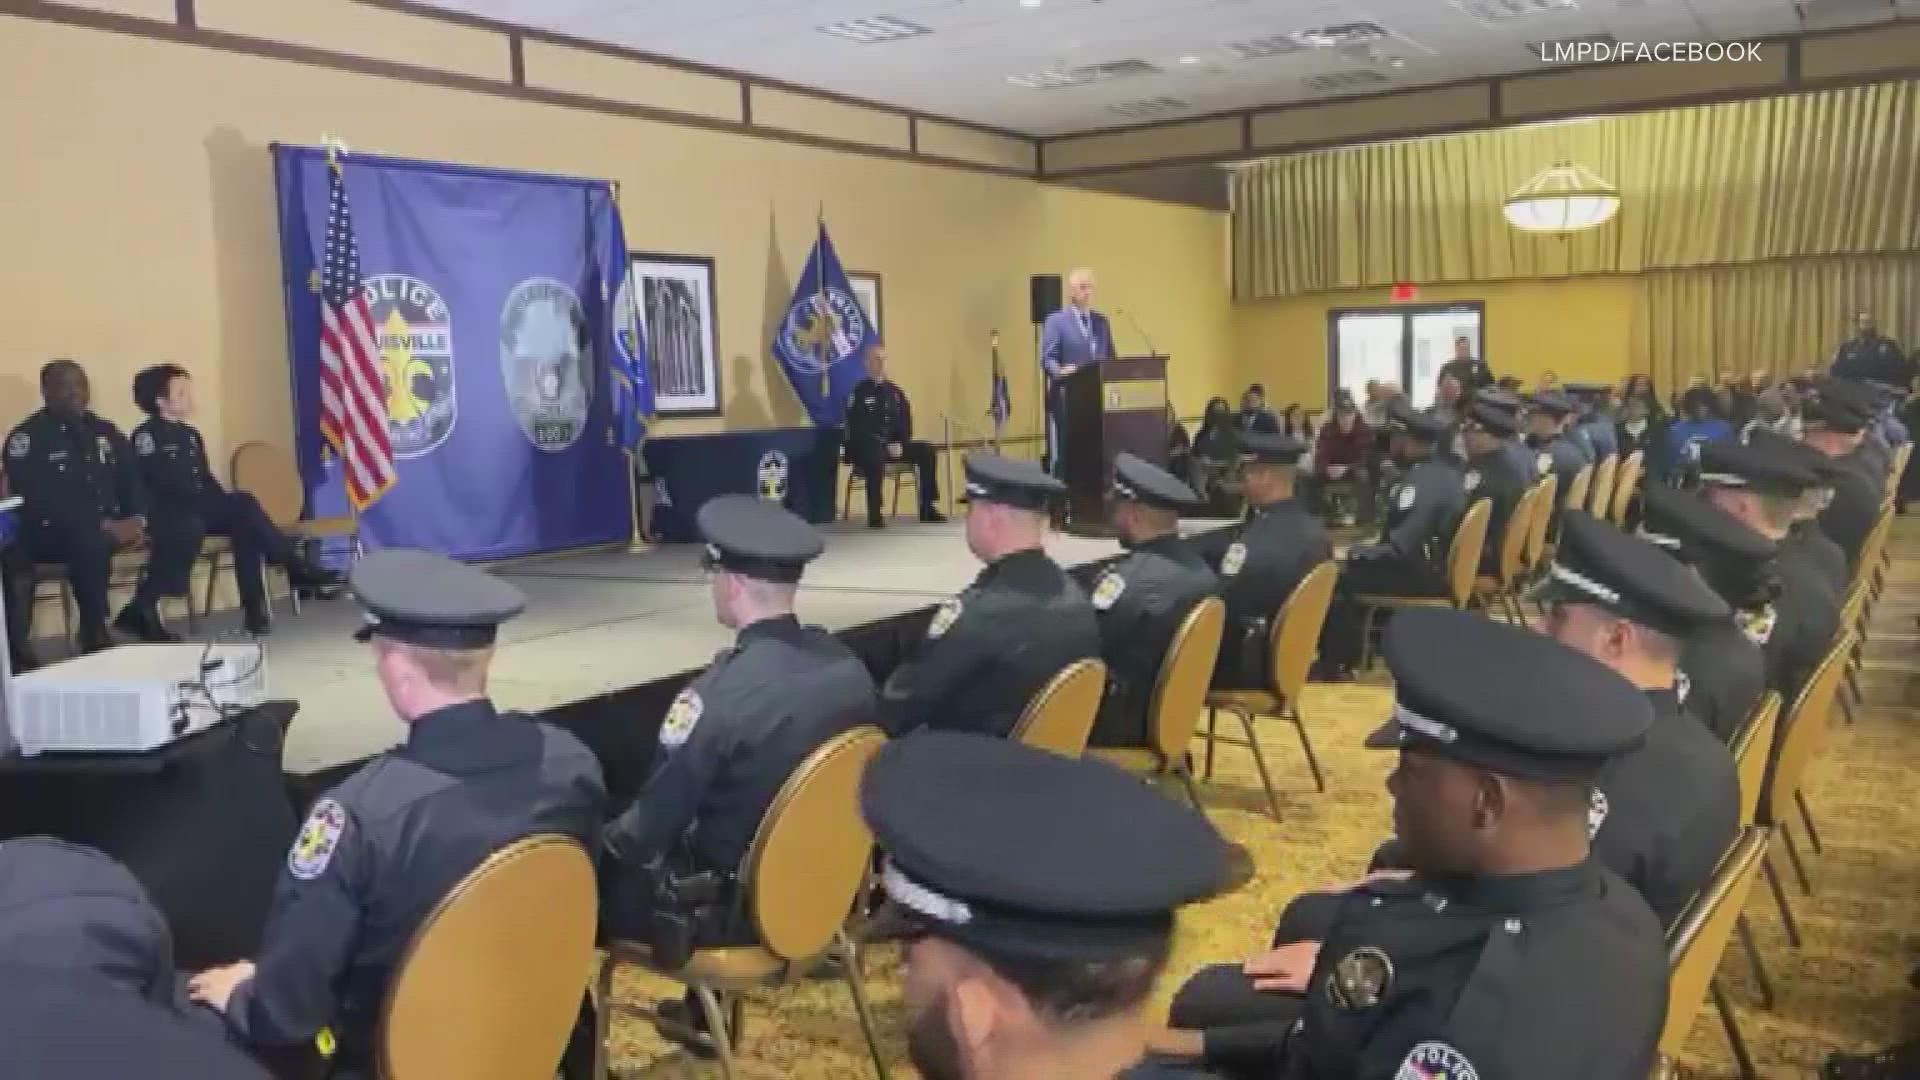 At the ceremony, outgoing Police Chief Erika Shields said she was proud of the 26 recruits and the strides the department is making to diversify itself.